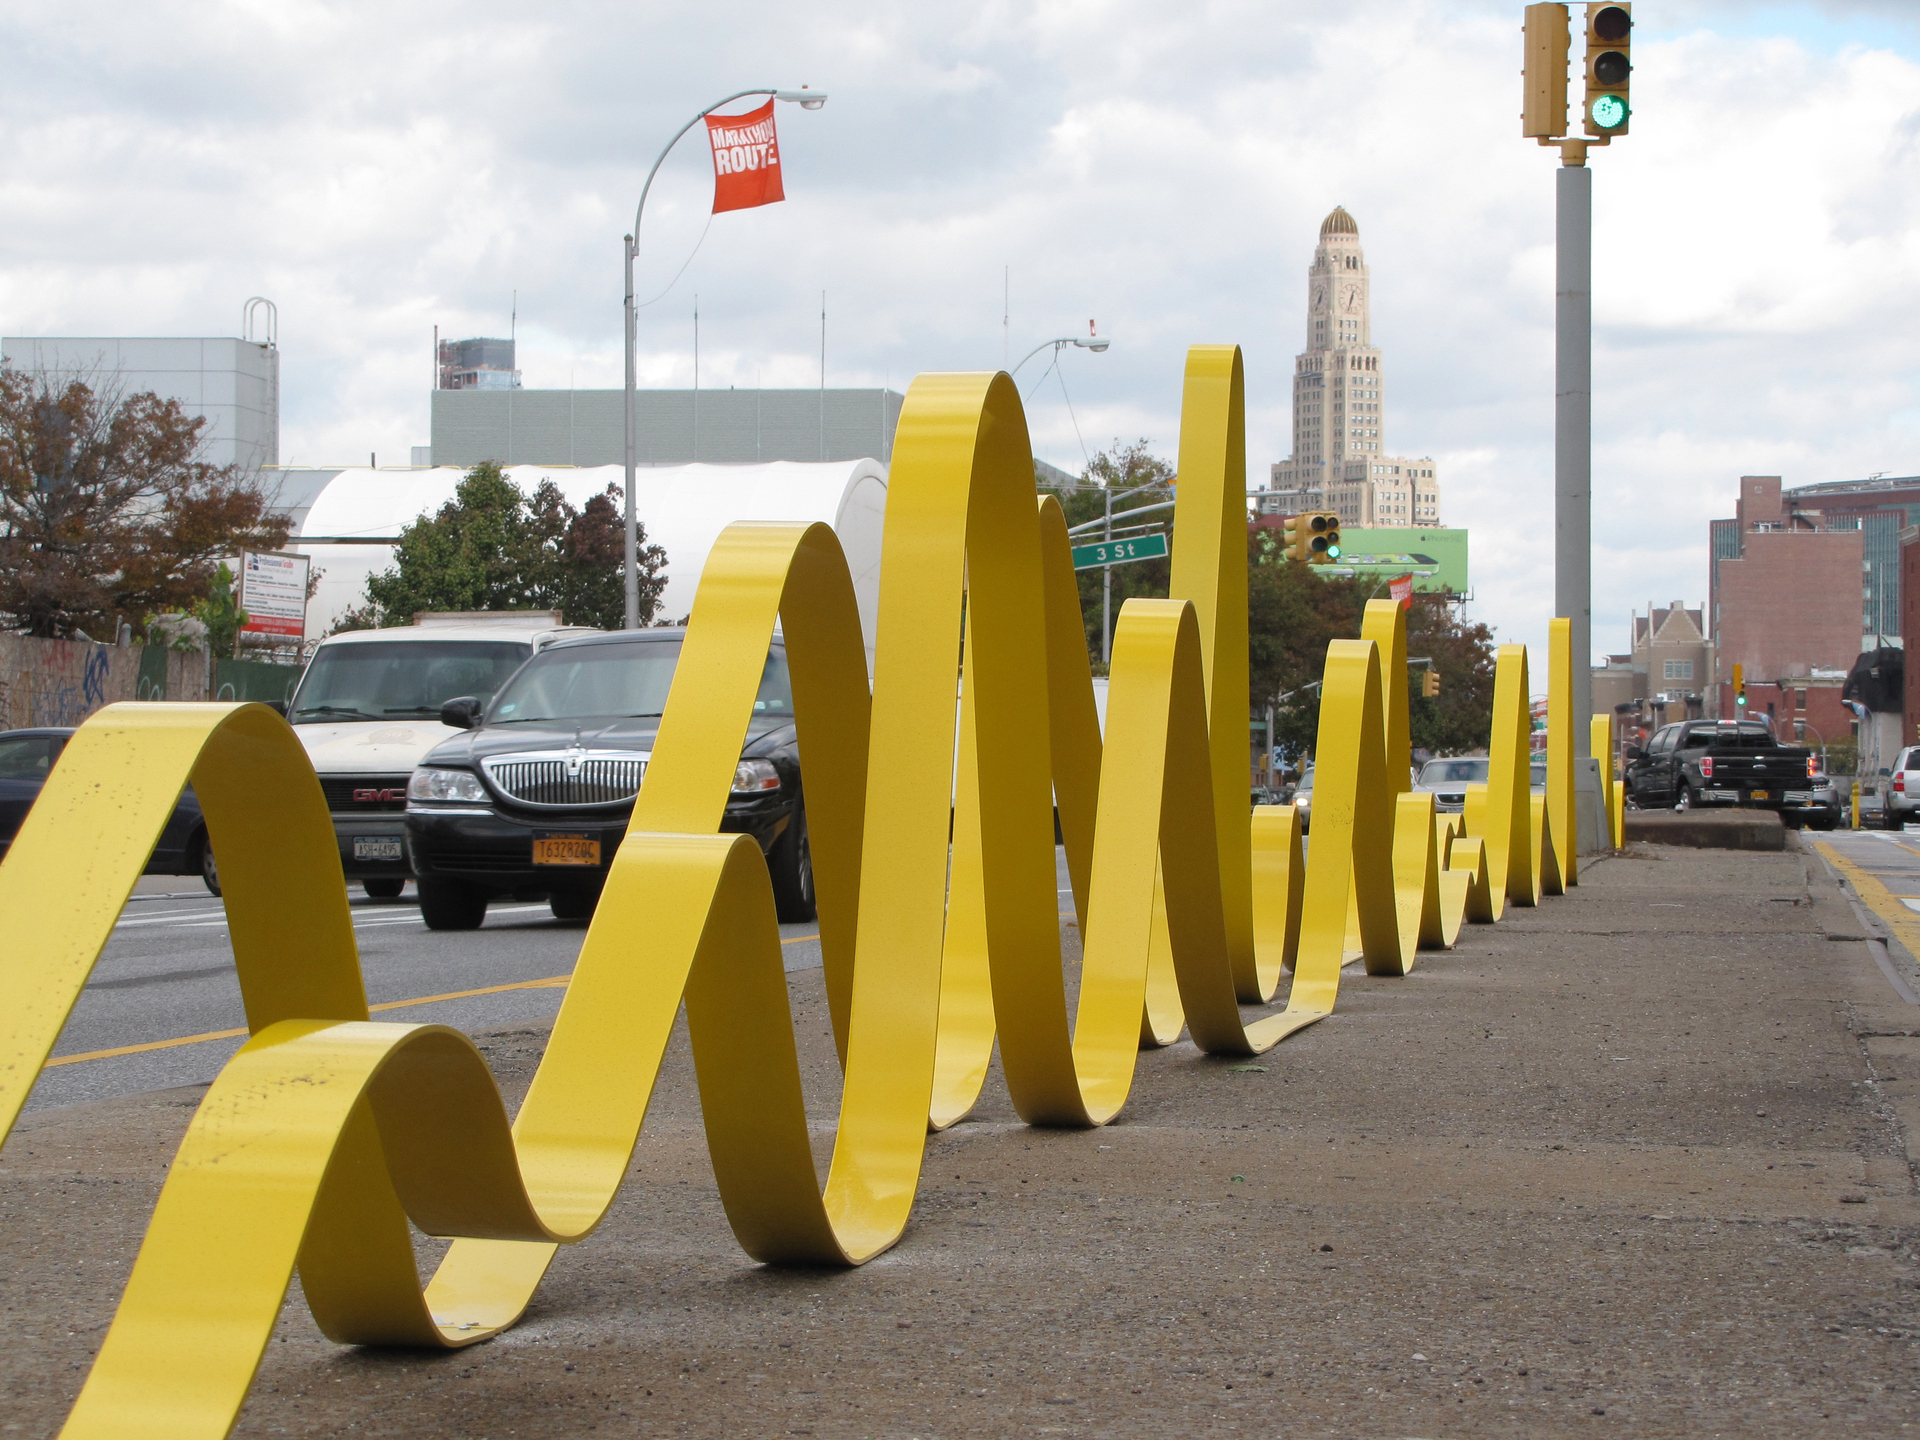 A large bright yellow sculpture outside on the road.